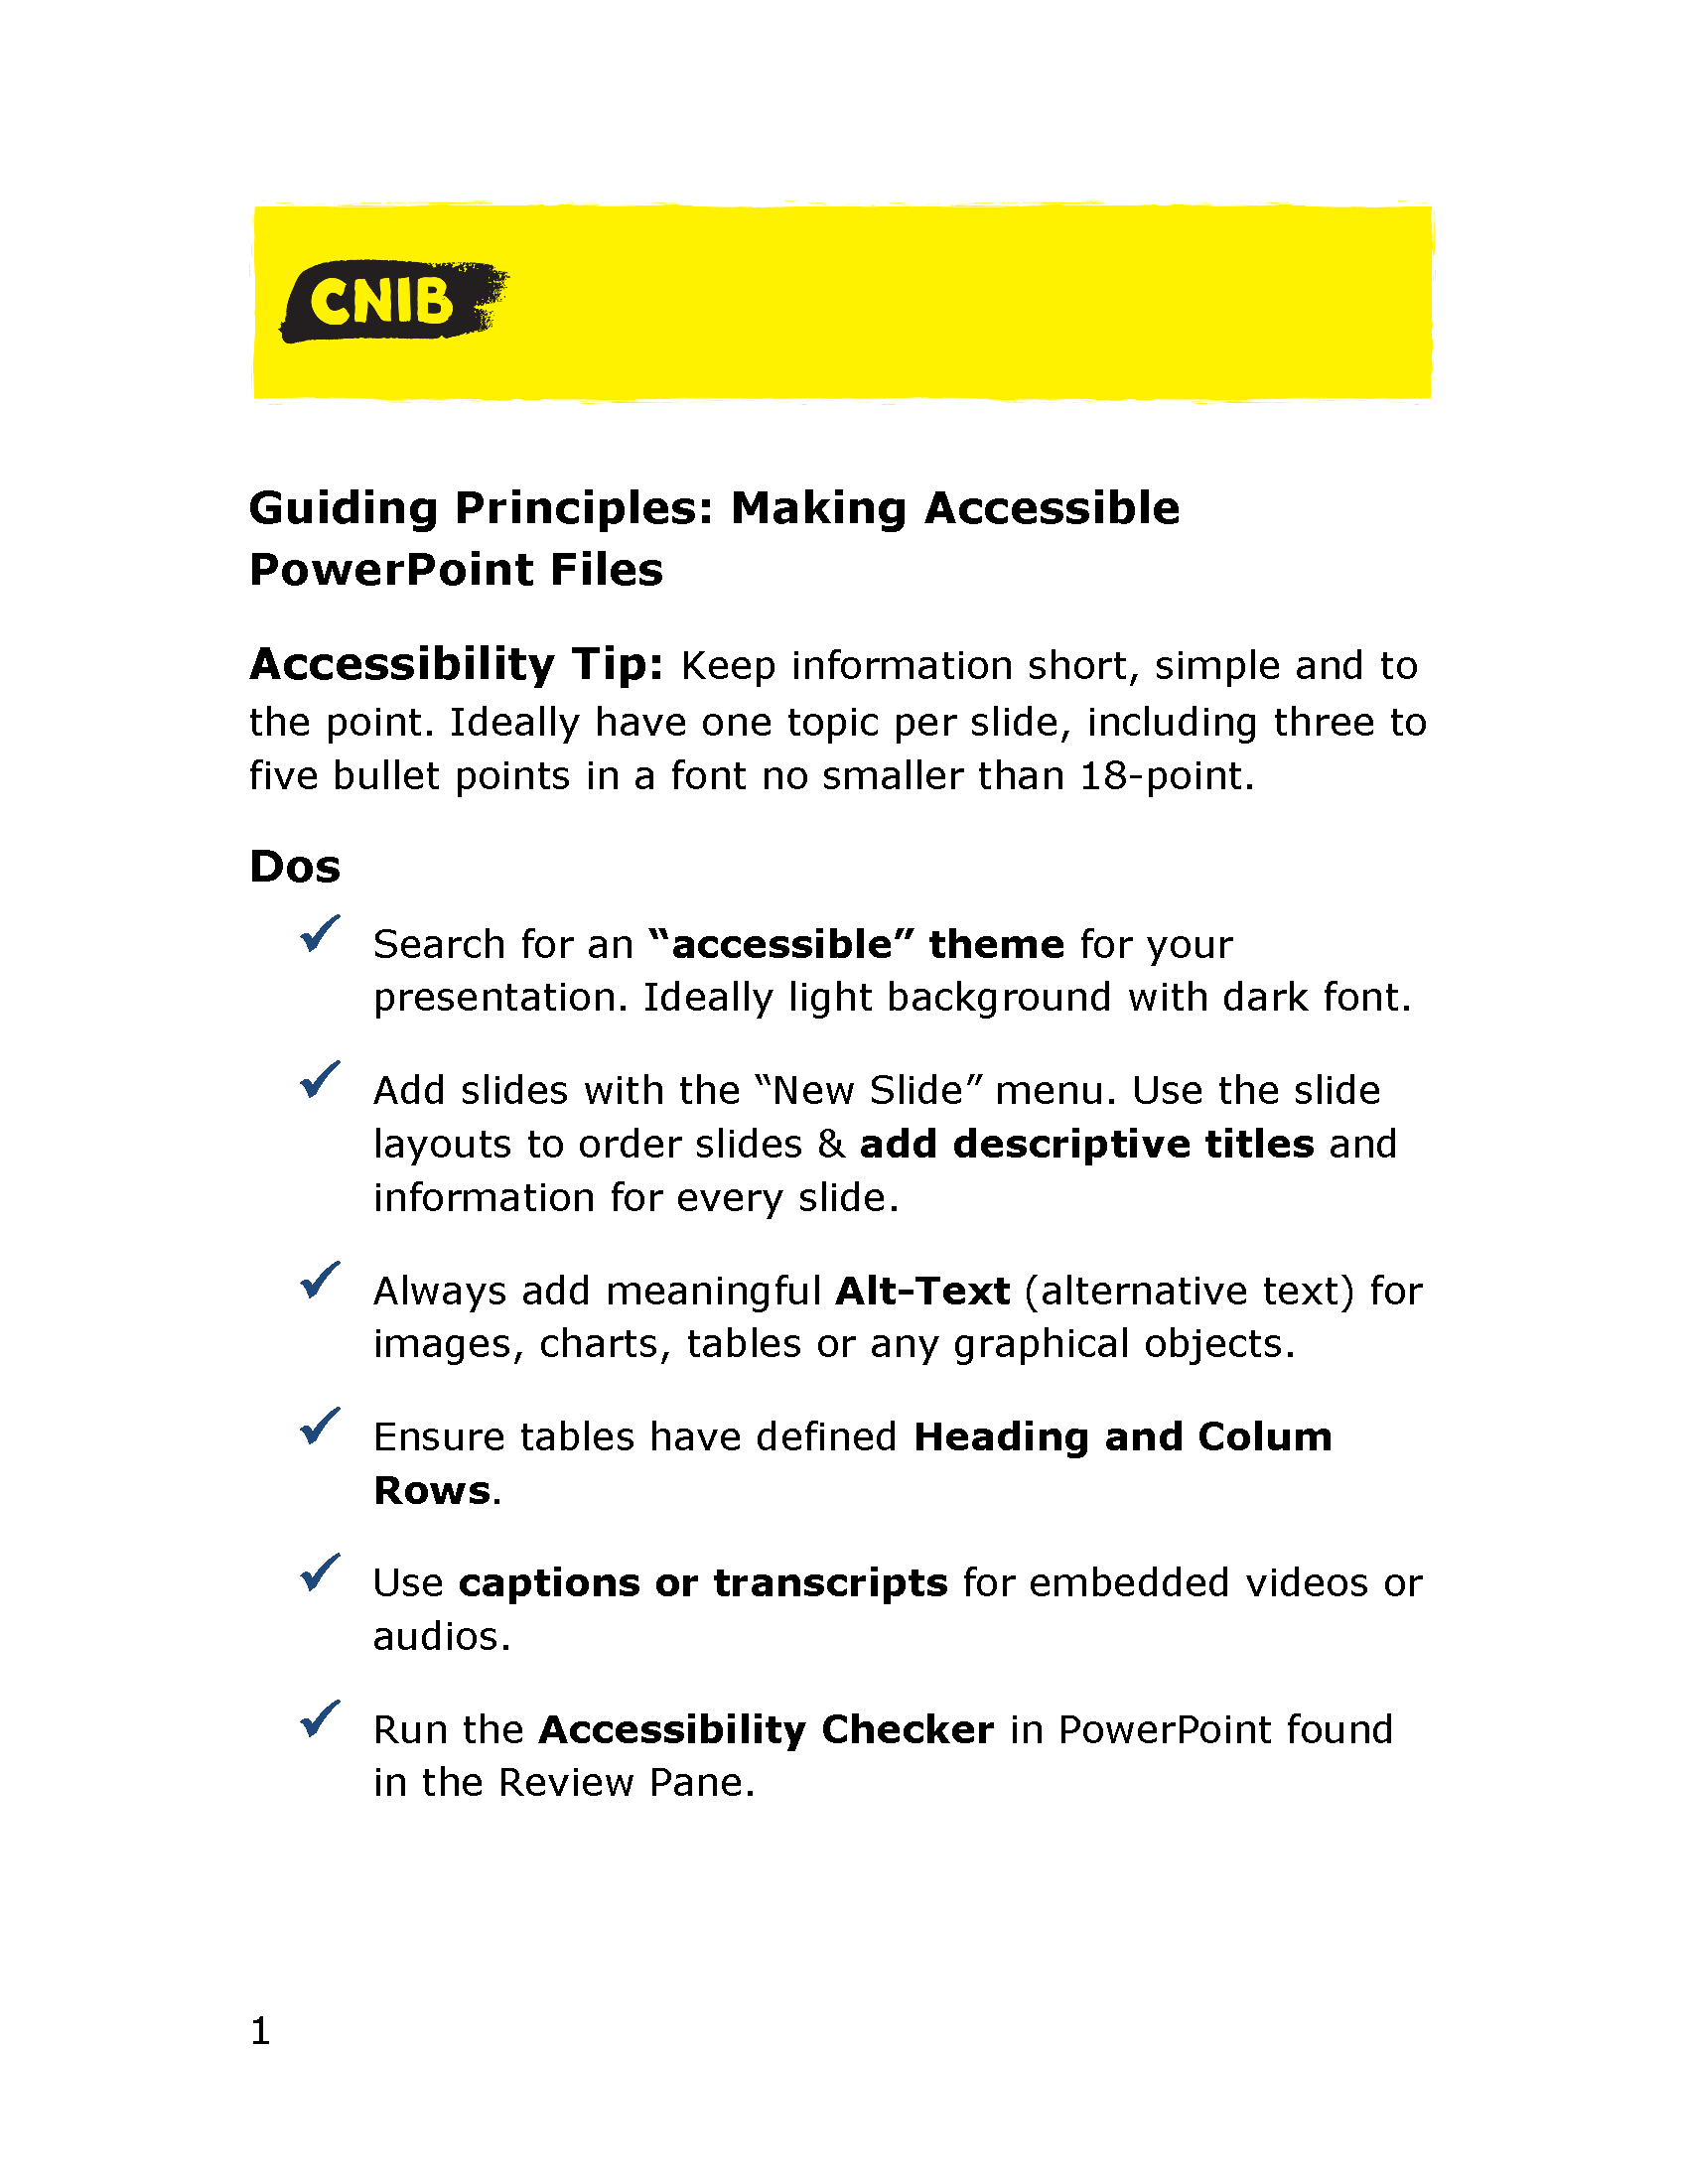 CNIB Guiding Principles: Making Accessible PowerPoint Files